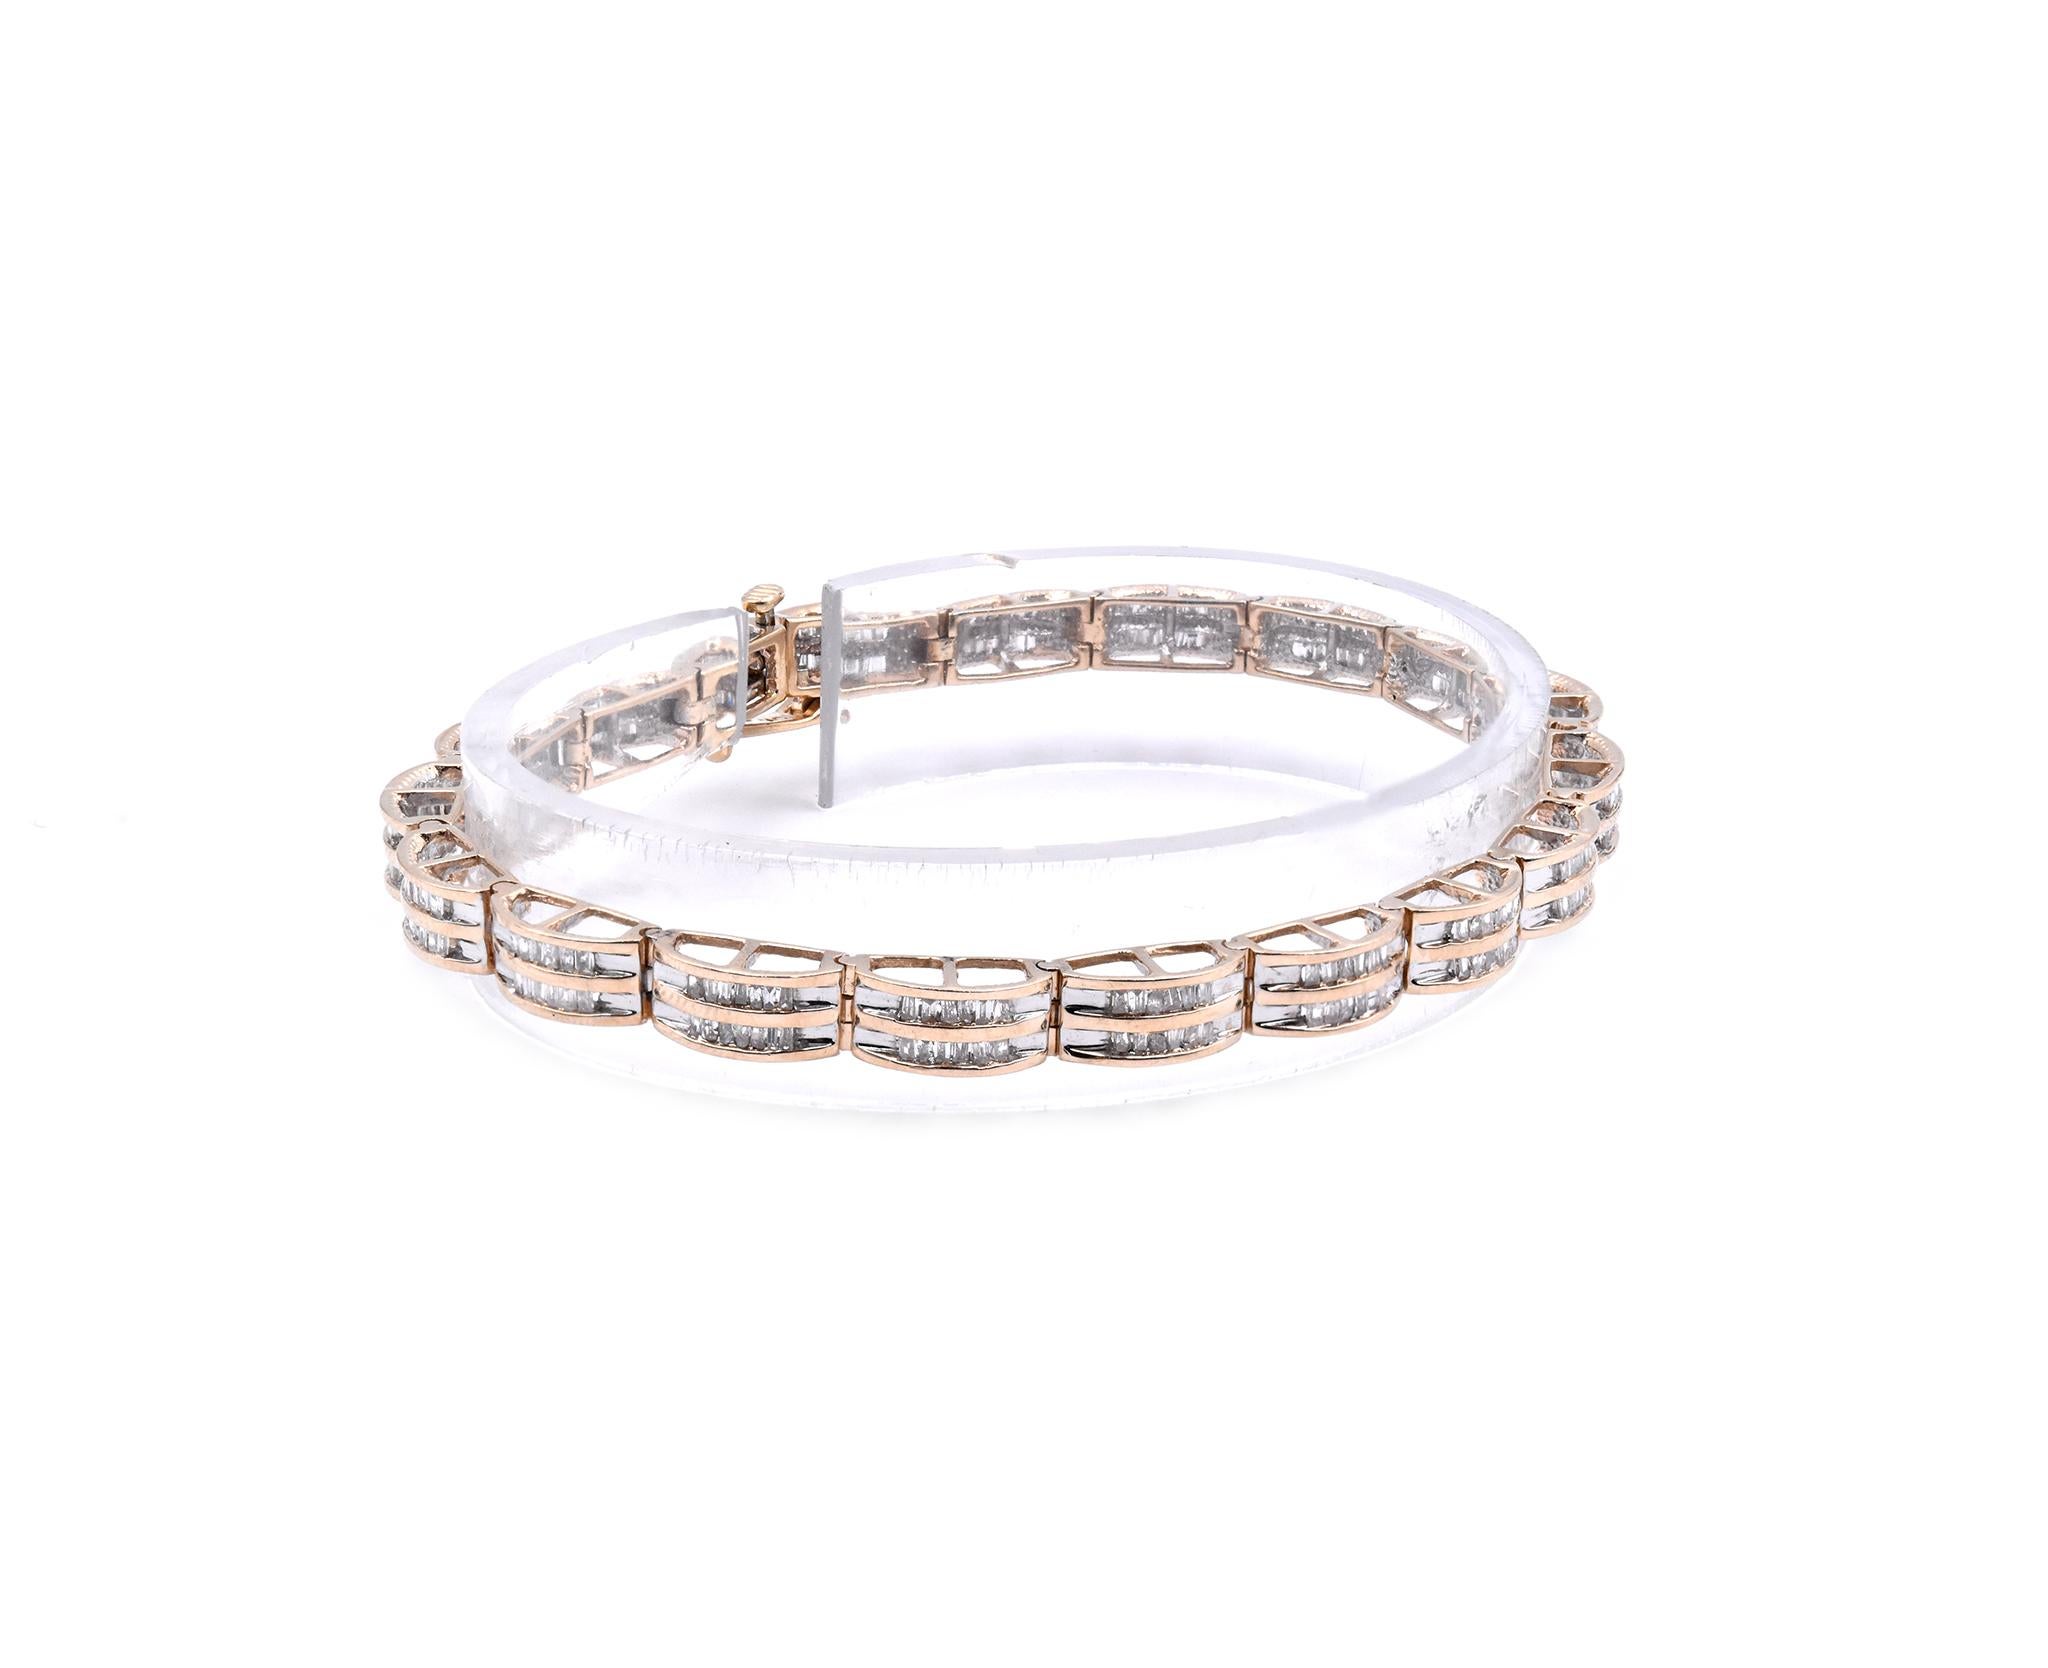 Material: 10K yellow gold
Diamonds: 228 baguette cut = 2.28cttw
Color: H
Clarity: SI2
Dimensions: bracelet will fit up to a 7-inch wrist
Weight: 11.67 grams
